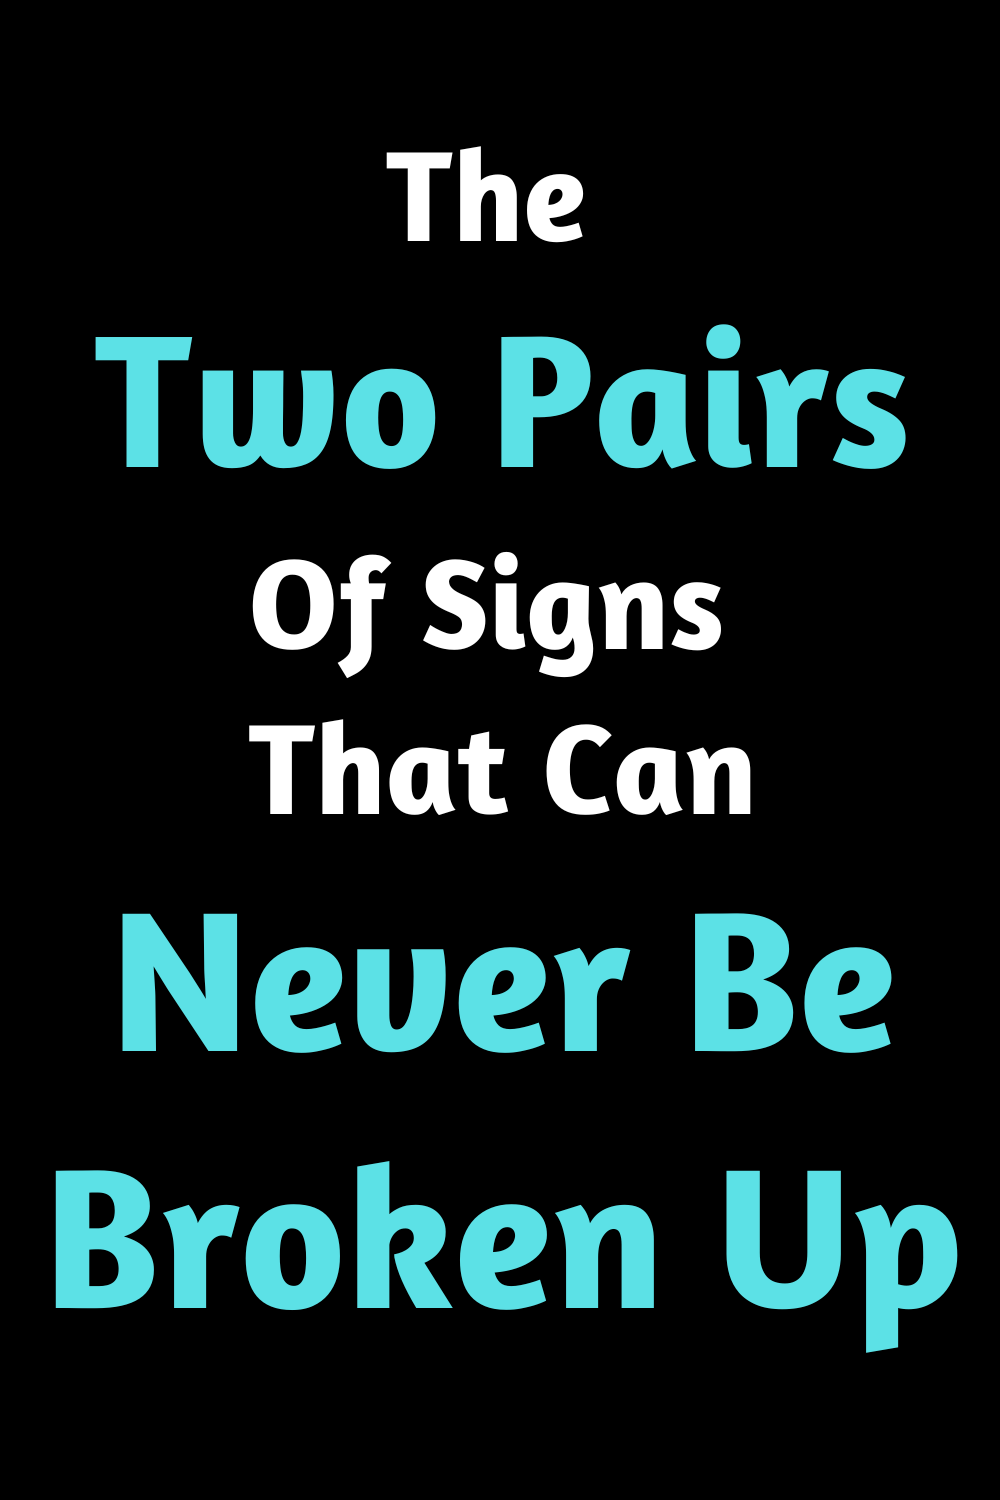 The Two Pairs Of Signs That Can Never Be Broken Up